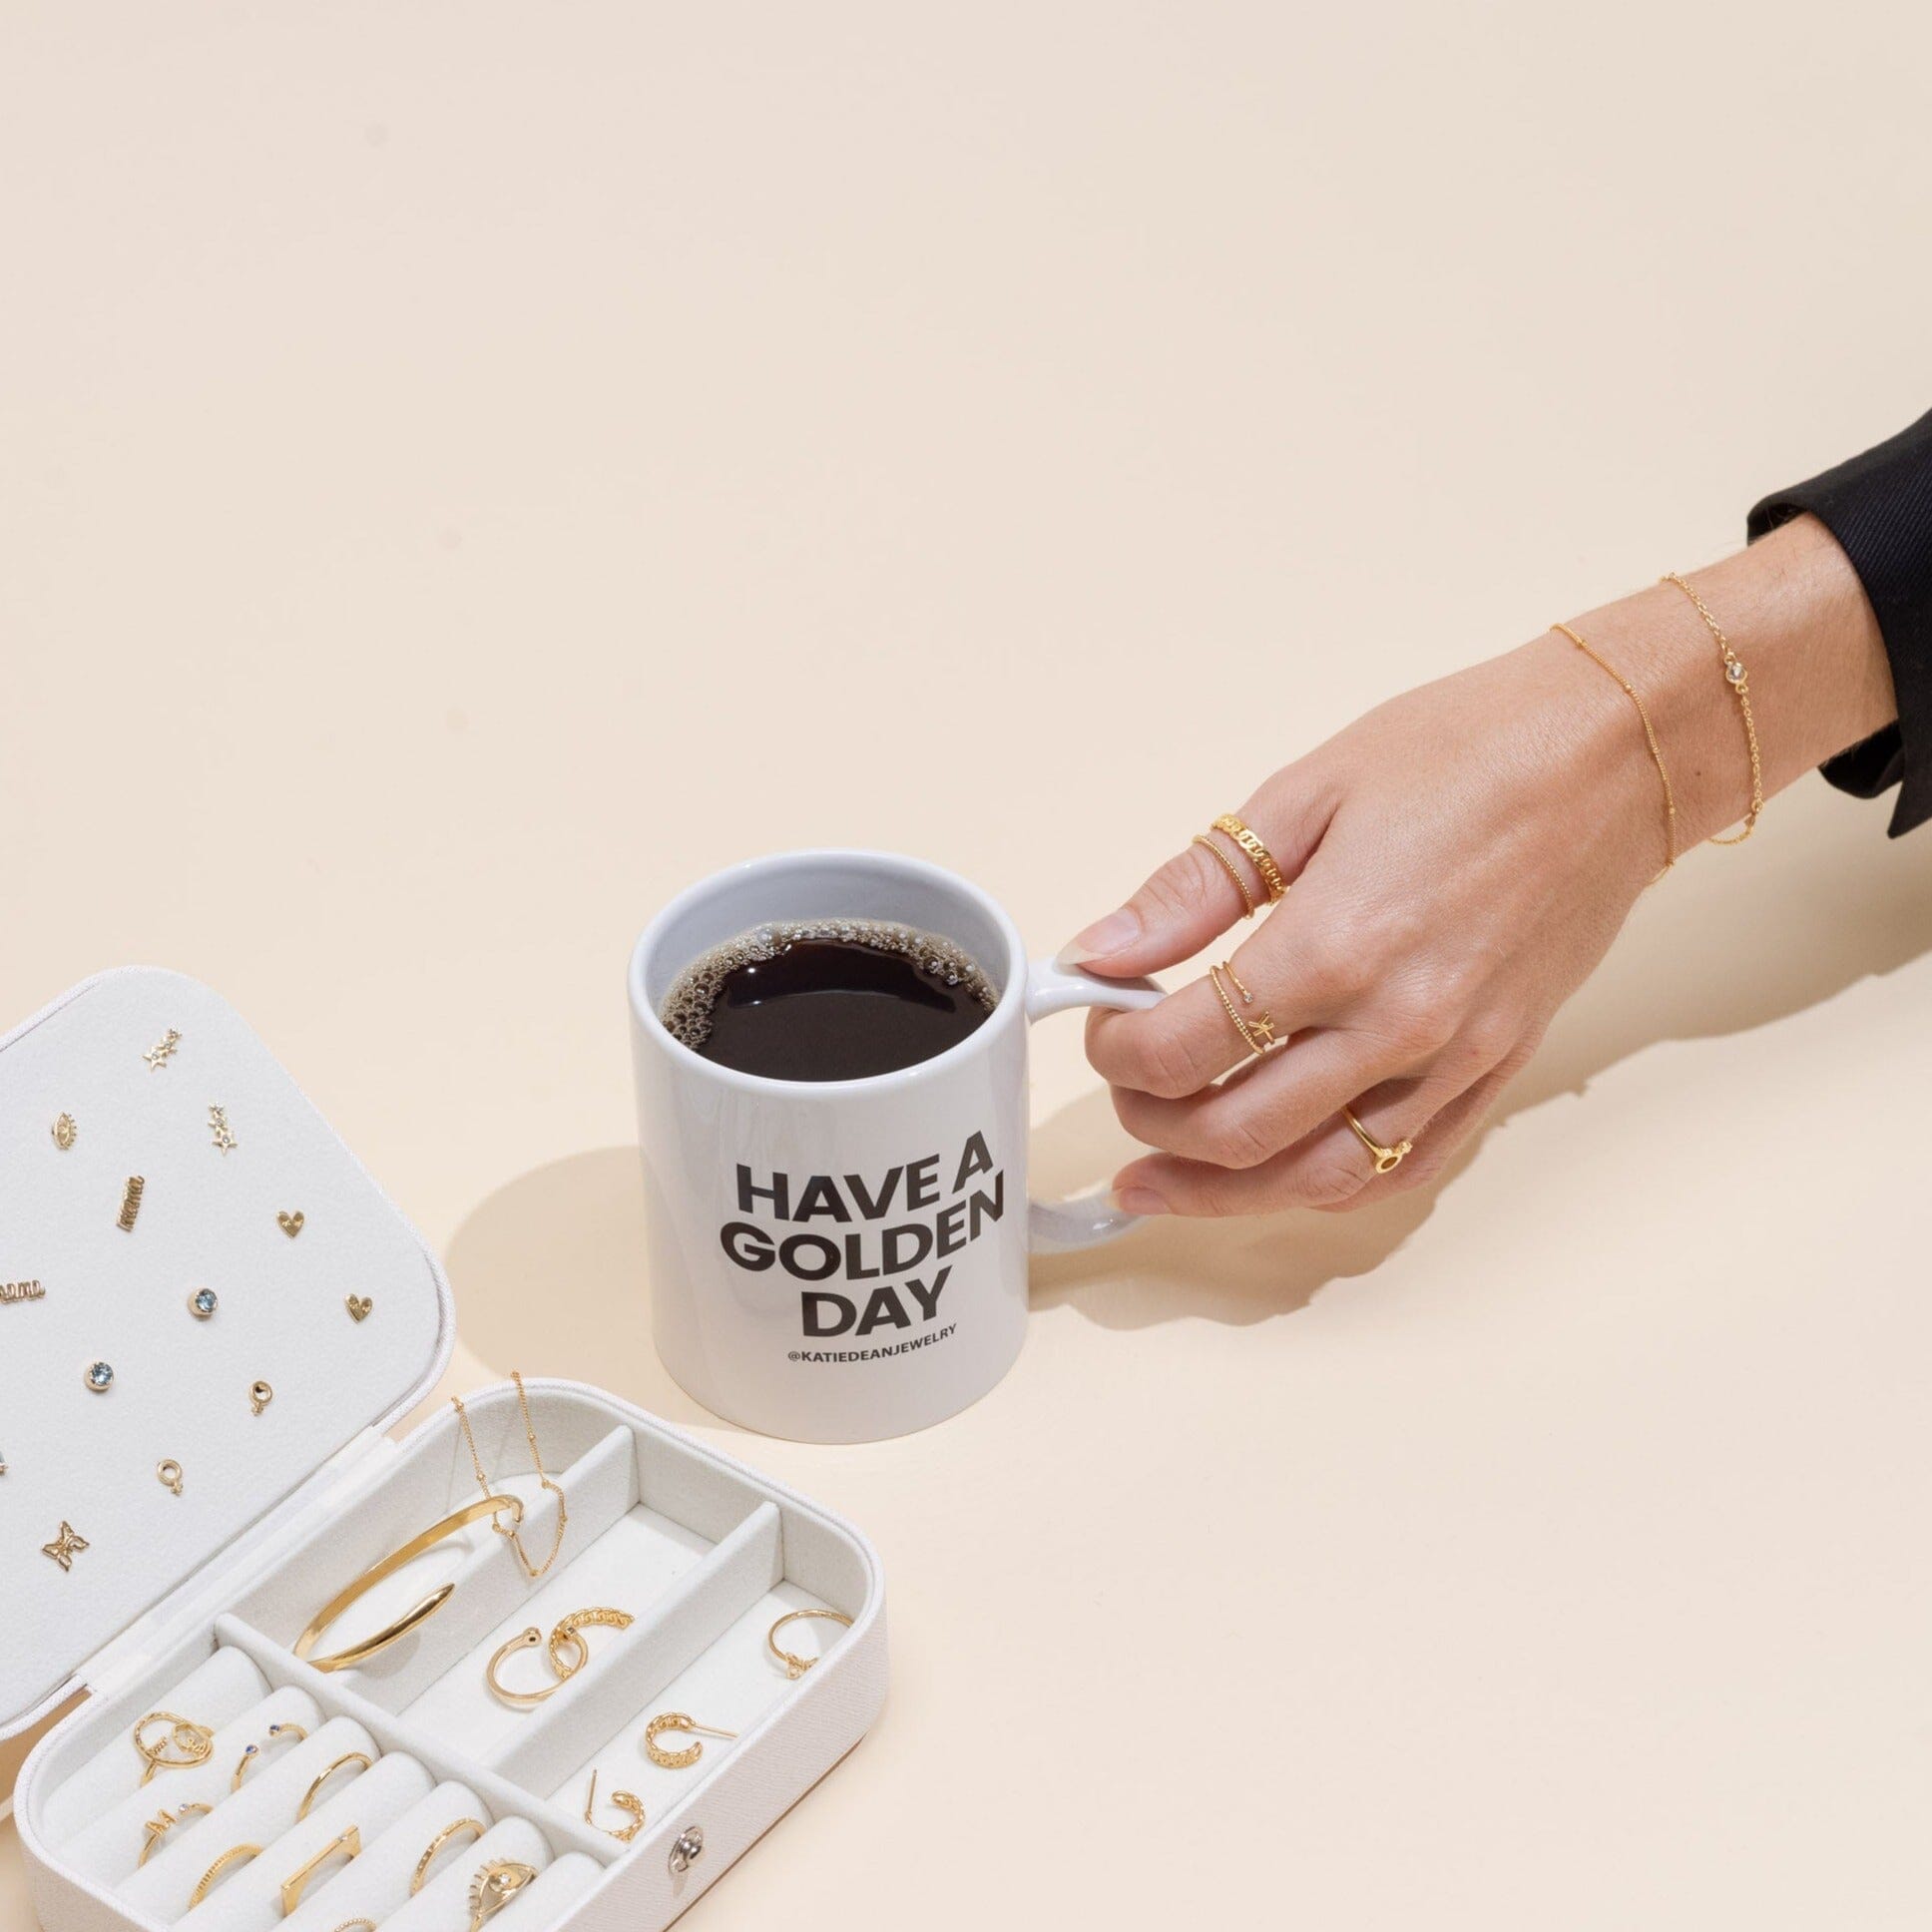 The Have a Golden Day Mug is an exclusive Katie Dean Jewelry coffee (or tea!) mug that we designed to remind you that it's always a good day to have a golden day.